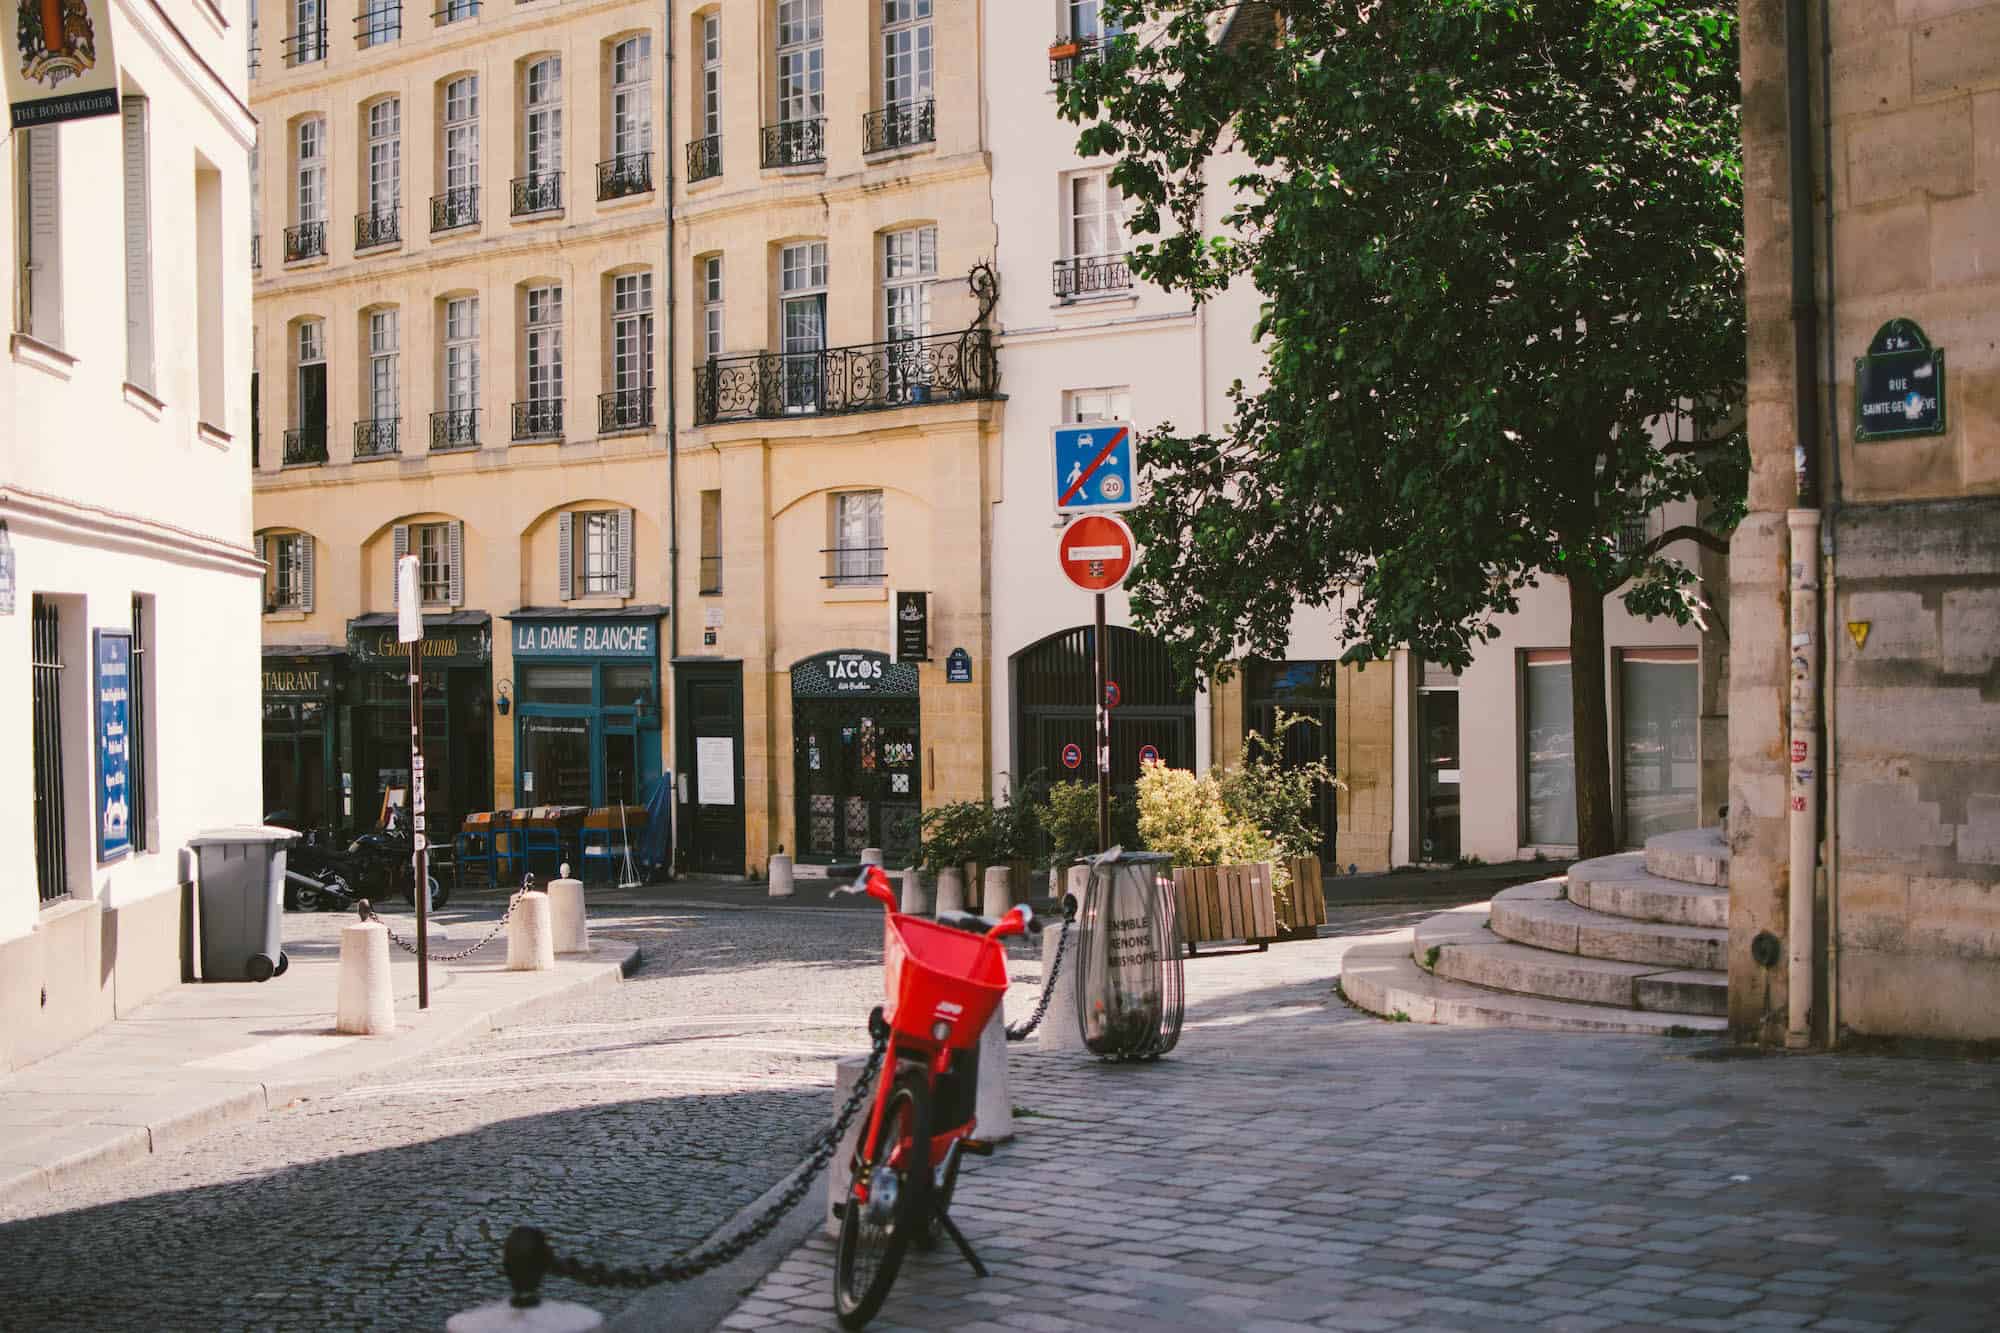 A cobblestone street in Paris with a red bike in the foreground.